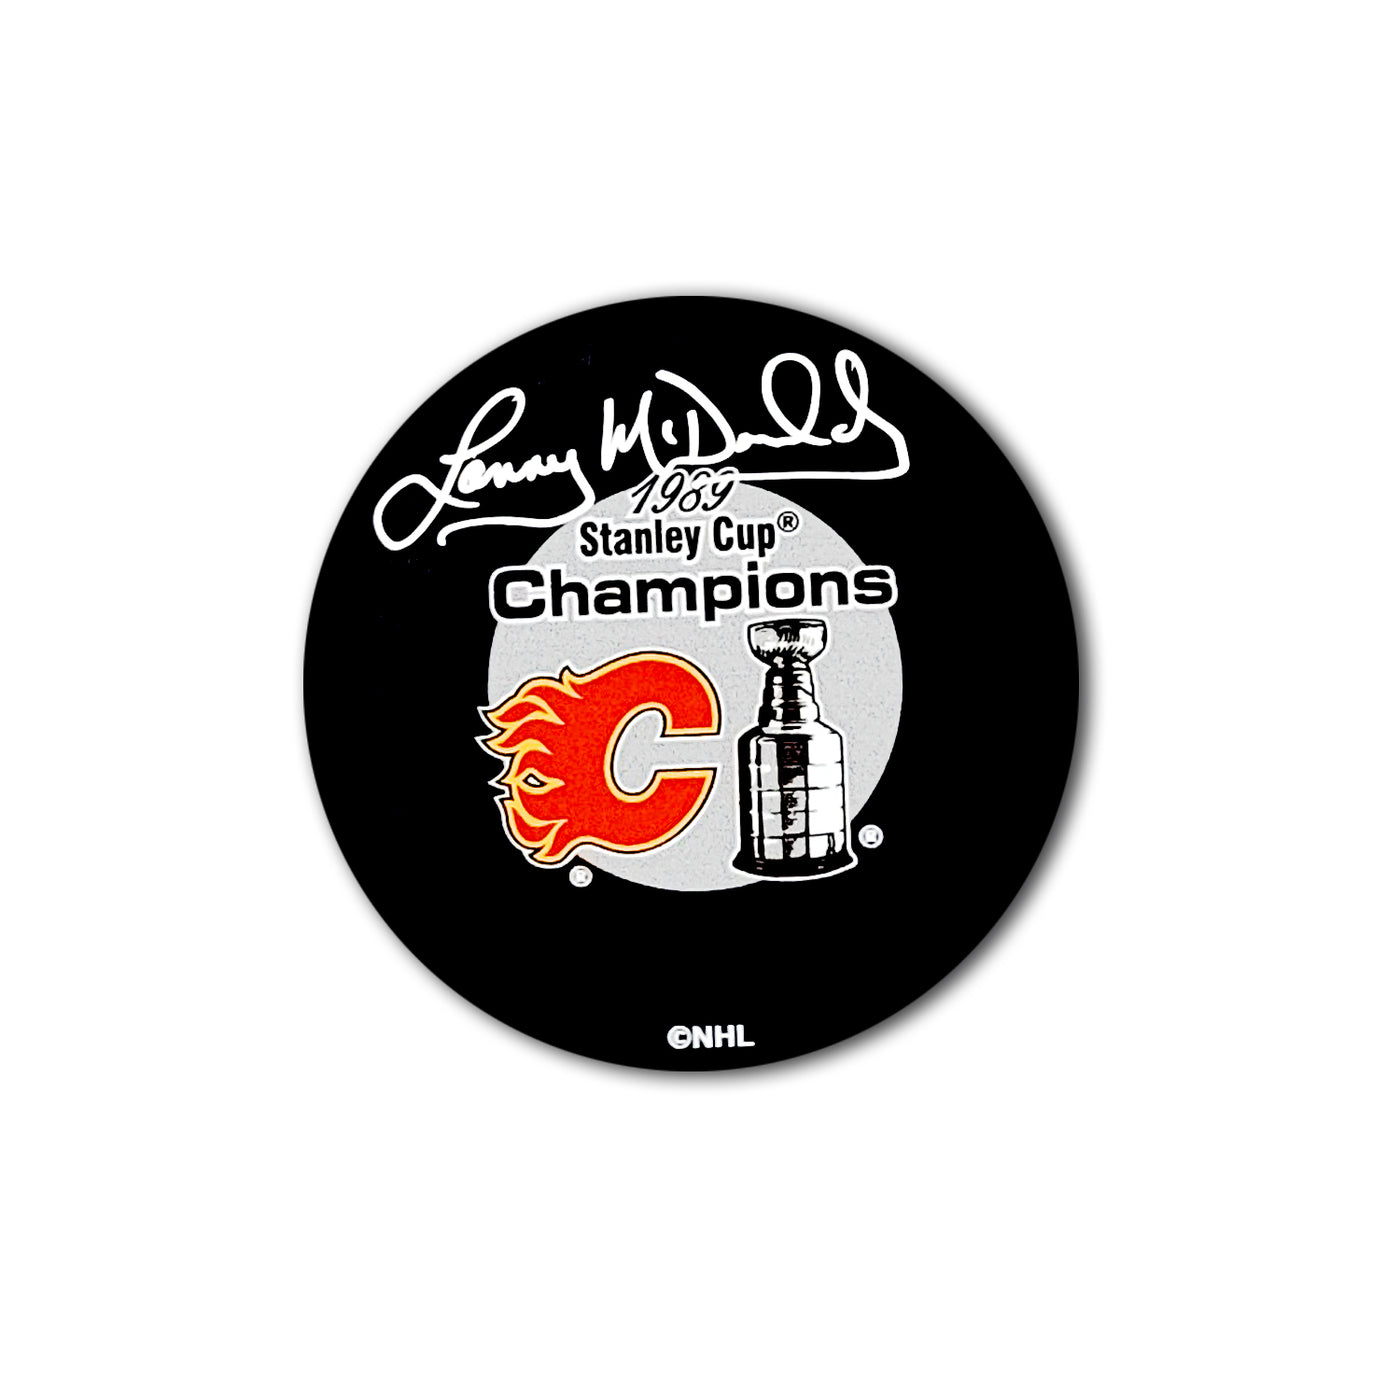 Lanny McDonald Calgary Flames Autographed 1989 Champions Autographed Hockey Puck